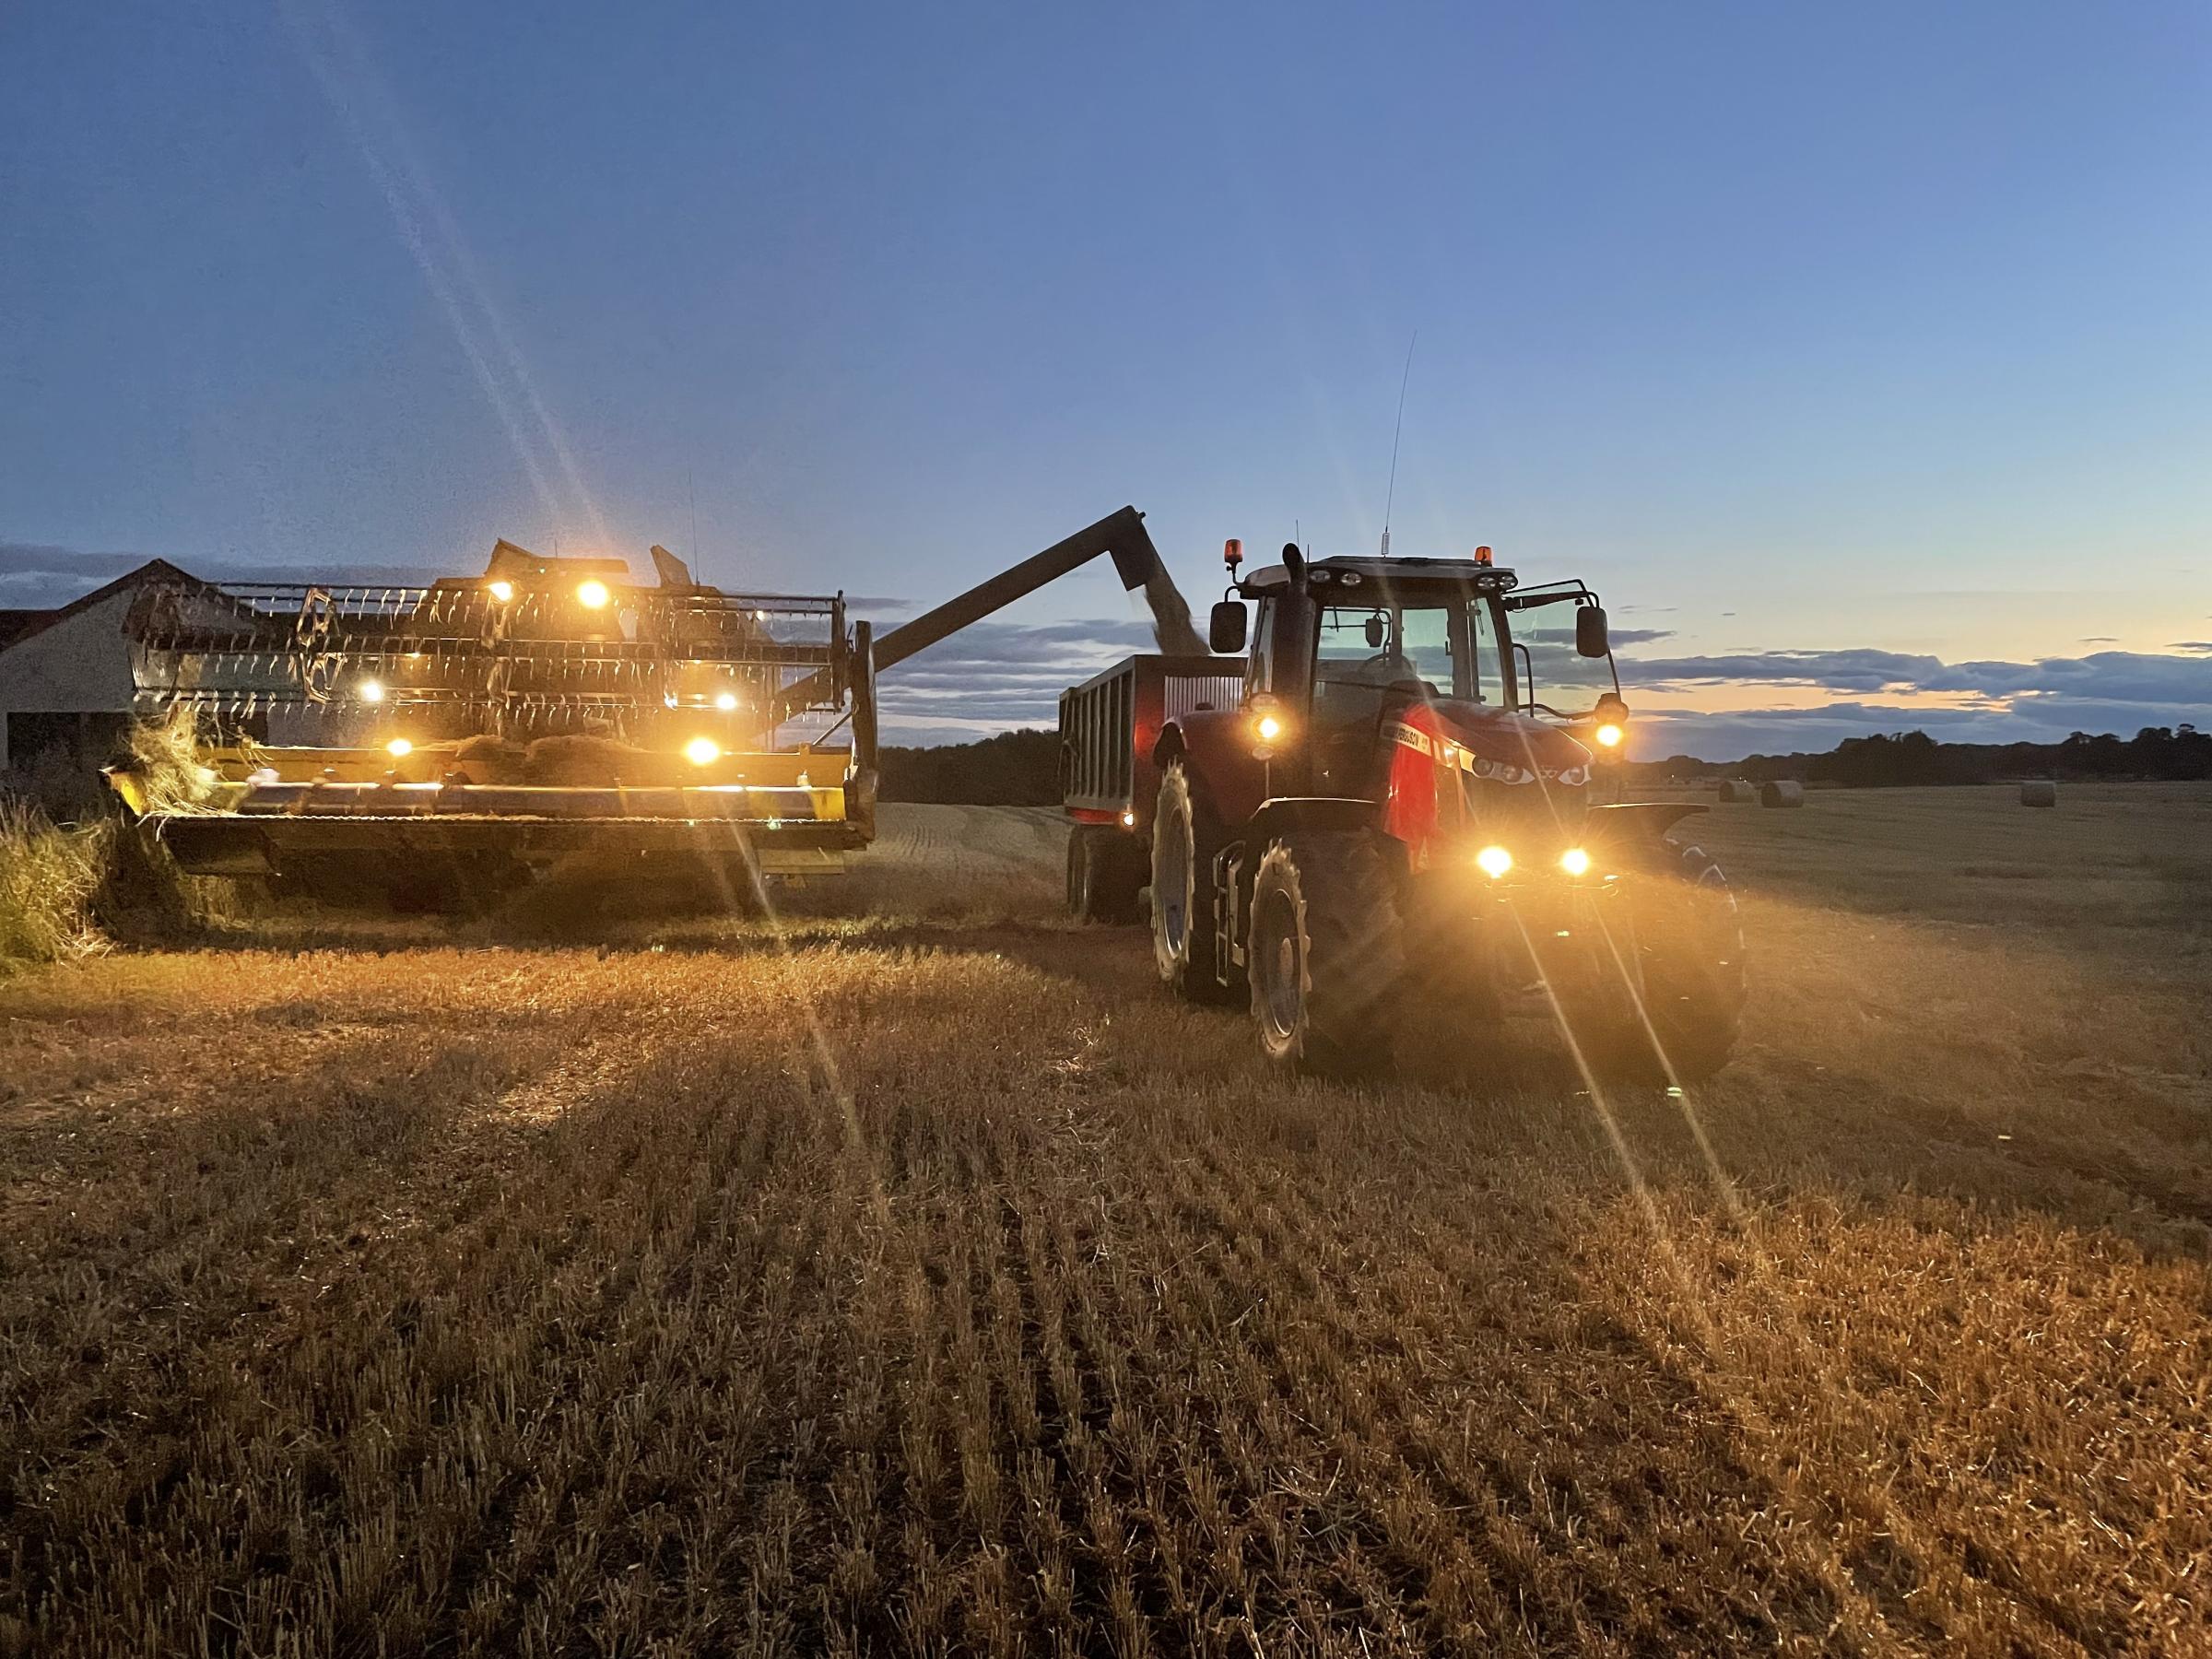 The last load of 2021 Harvest being cut on Monday, September 13, at Mounteagle, Tain, Easter Ross